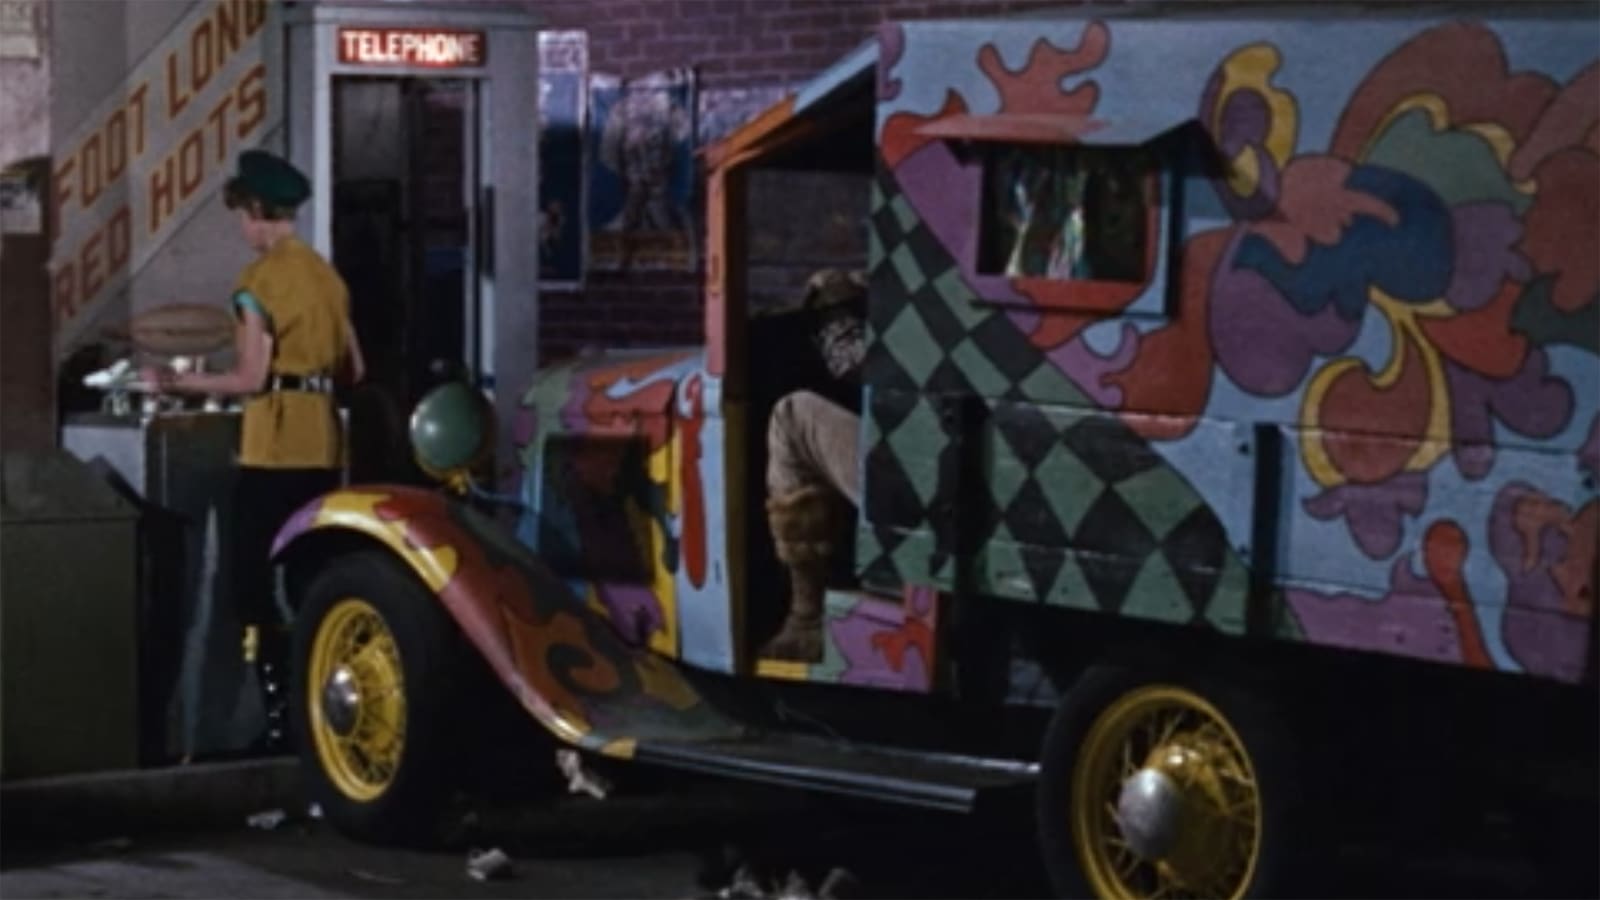 The hippie van from "The Love Bug"